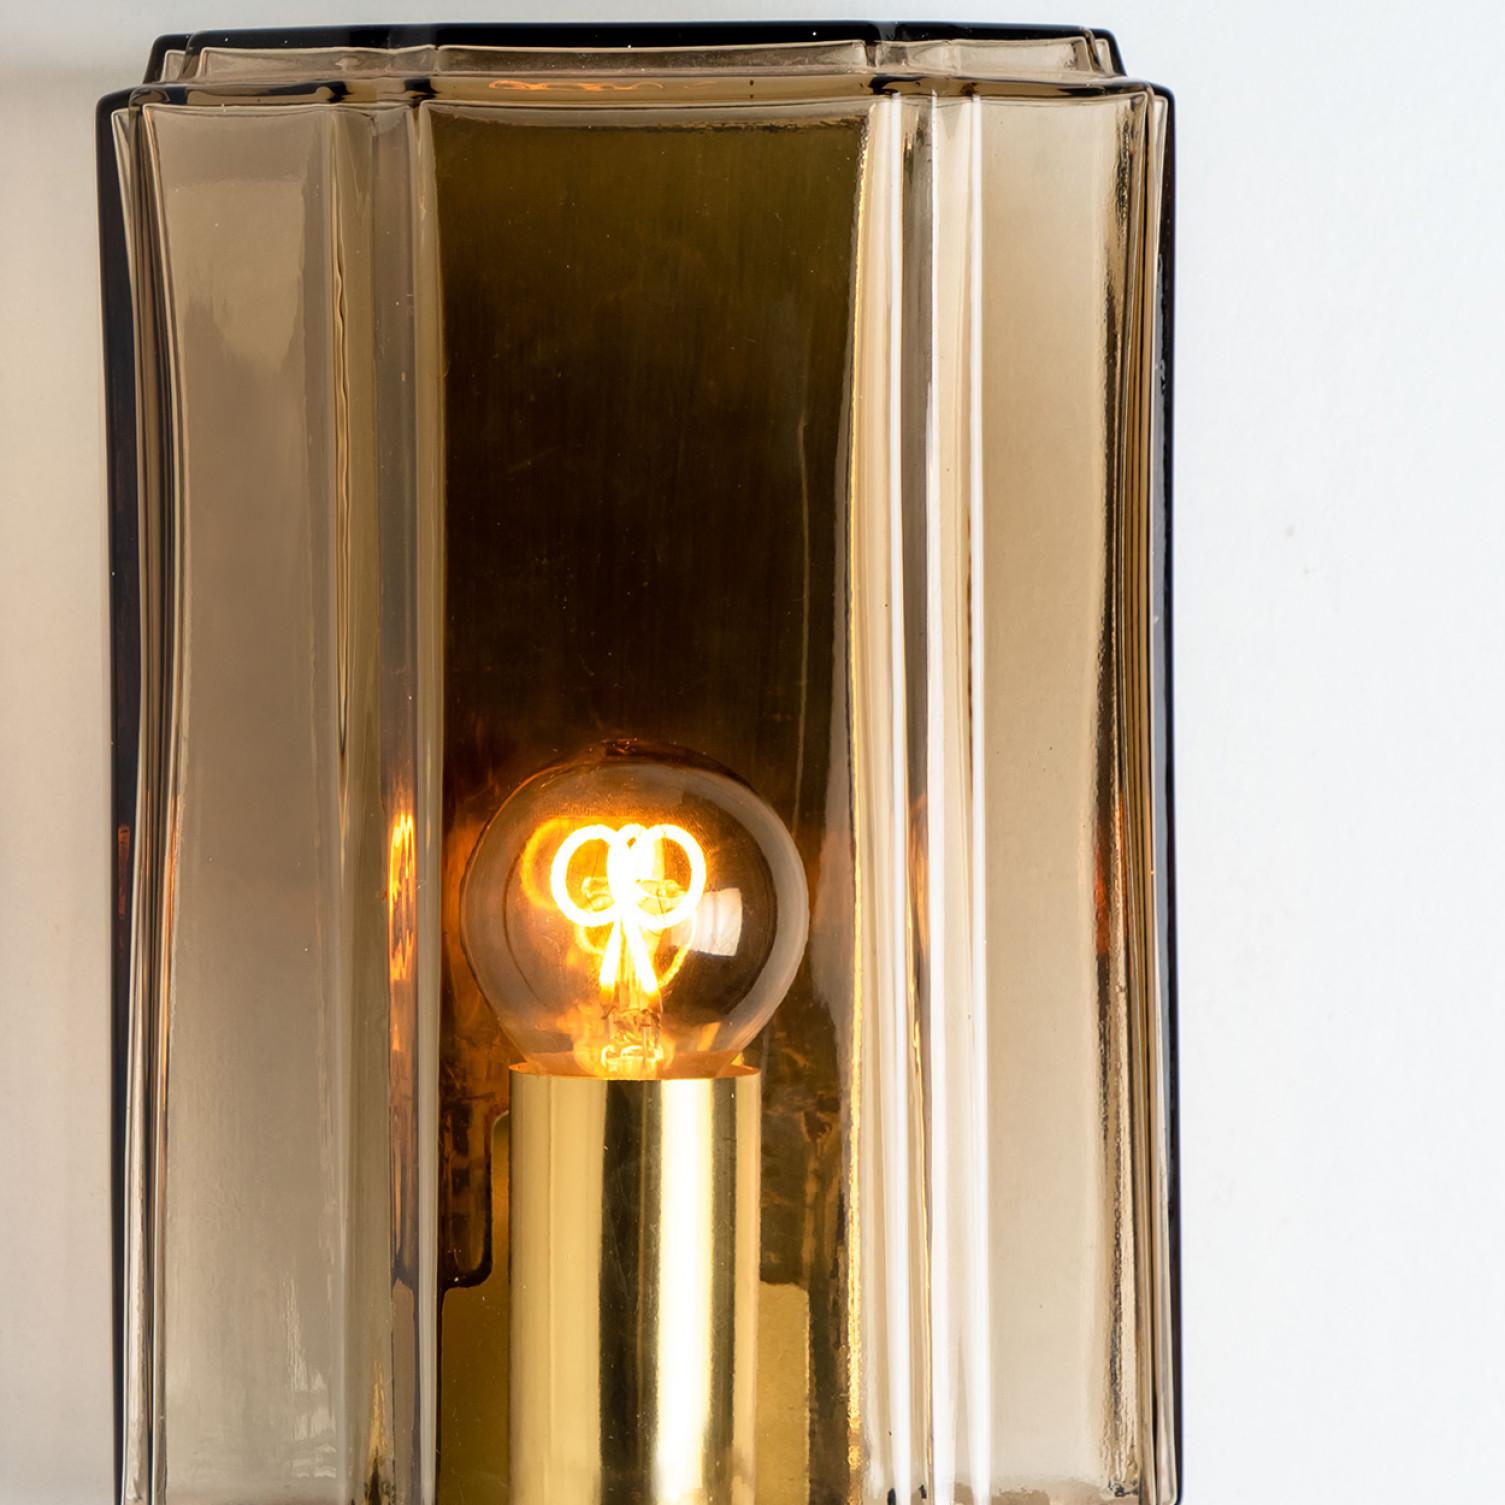 Several Smoked Glass Wall Lights Sconces by Glashütte Limburg, Germany, 1960 For Sale 7